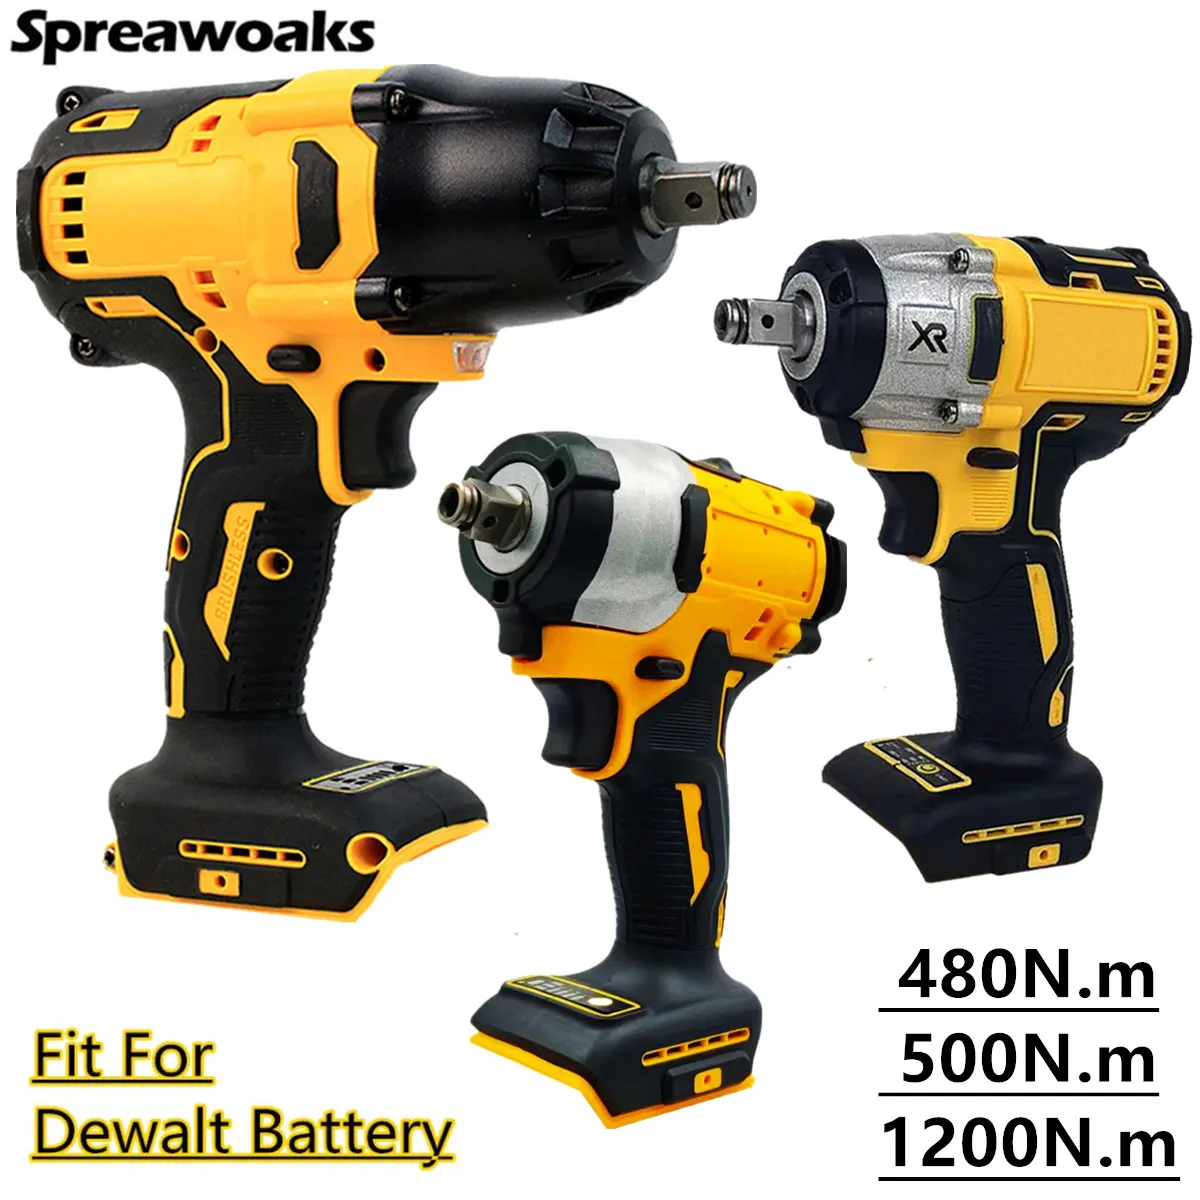 Brushless Impact Wrench Fit For Dewalt 20V Battery 480/500/1200N.m Electric Cordless Driver Car Repair 1/2 inch Power Tools